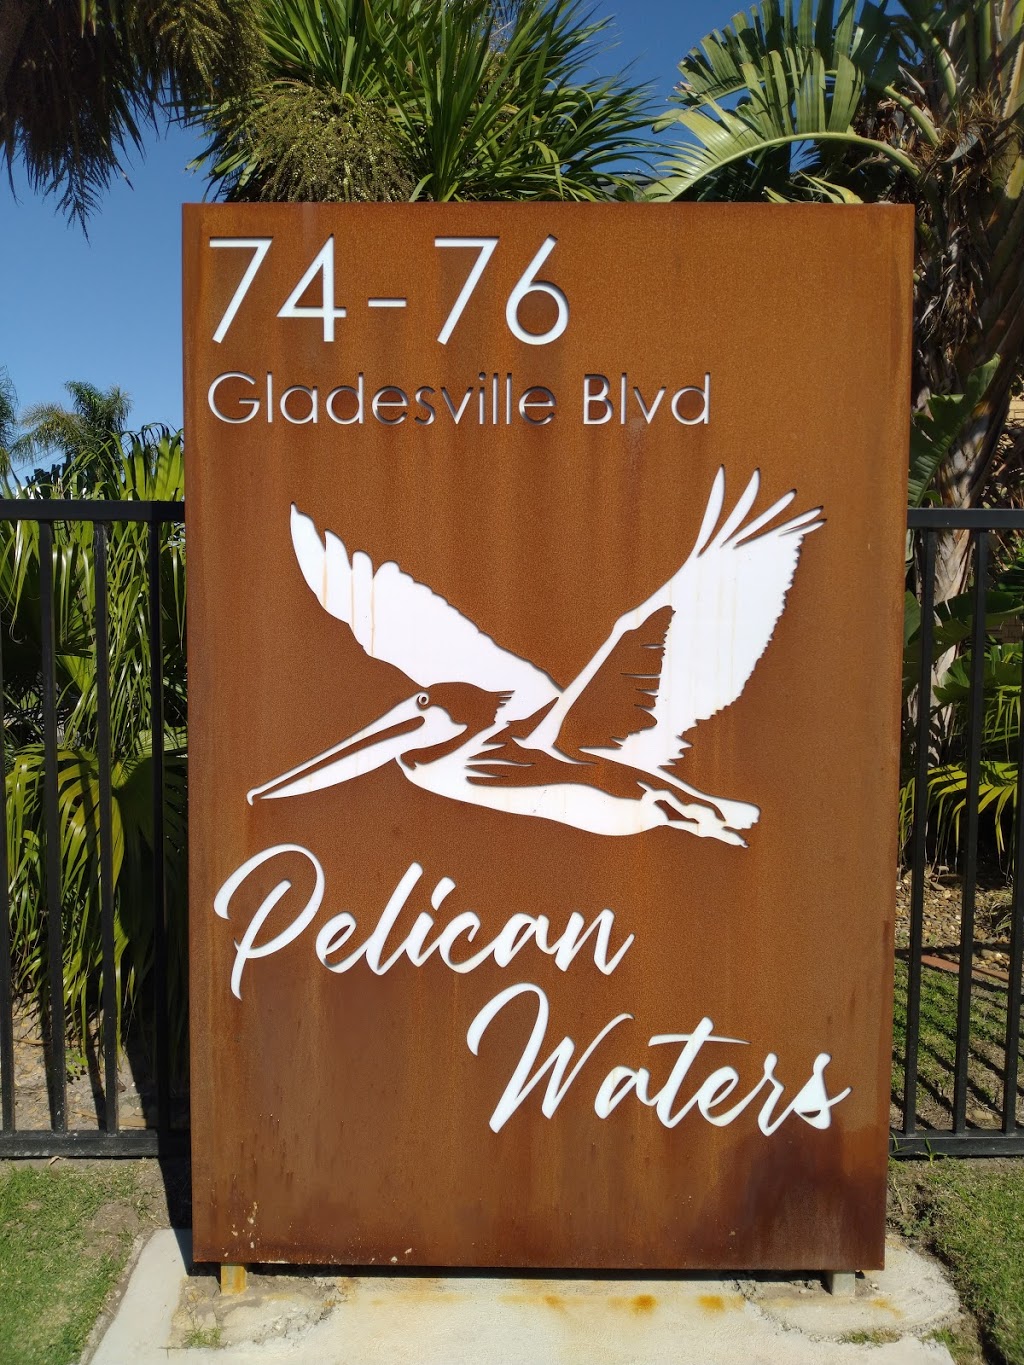 Pelican Waters | 74-76 Gladesville Blvd, Patterson Lakes VIC 3197, Australia | Phone: (03) 8586 1300